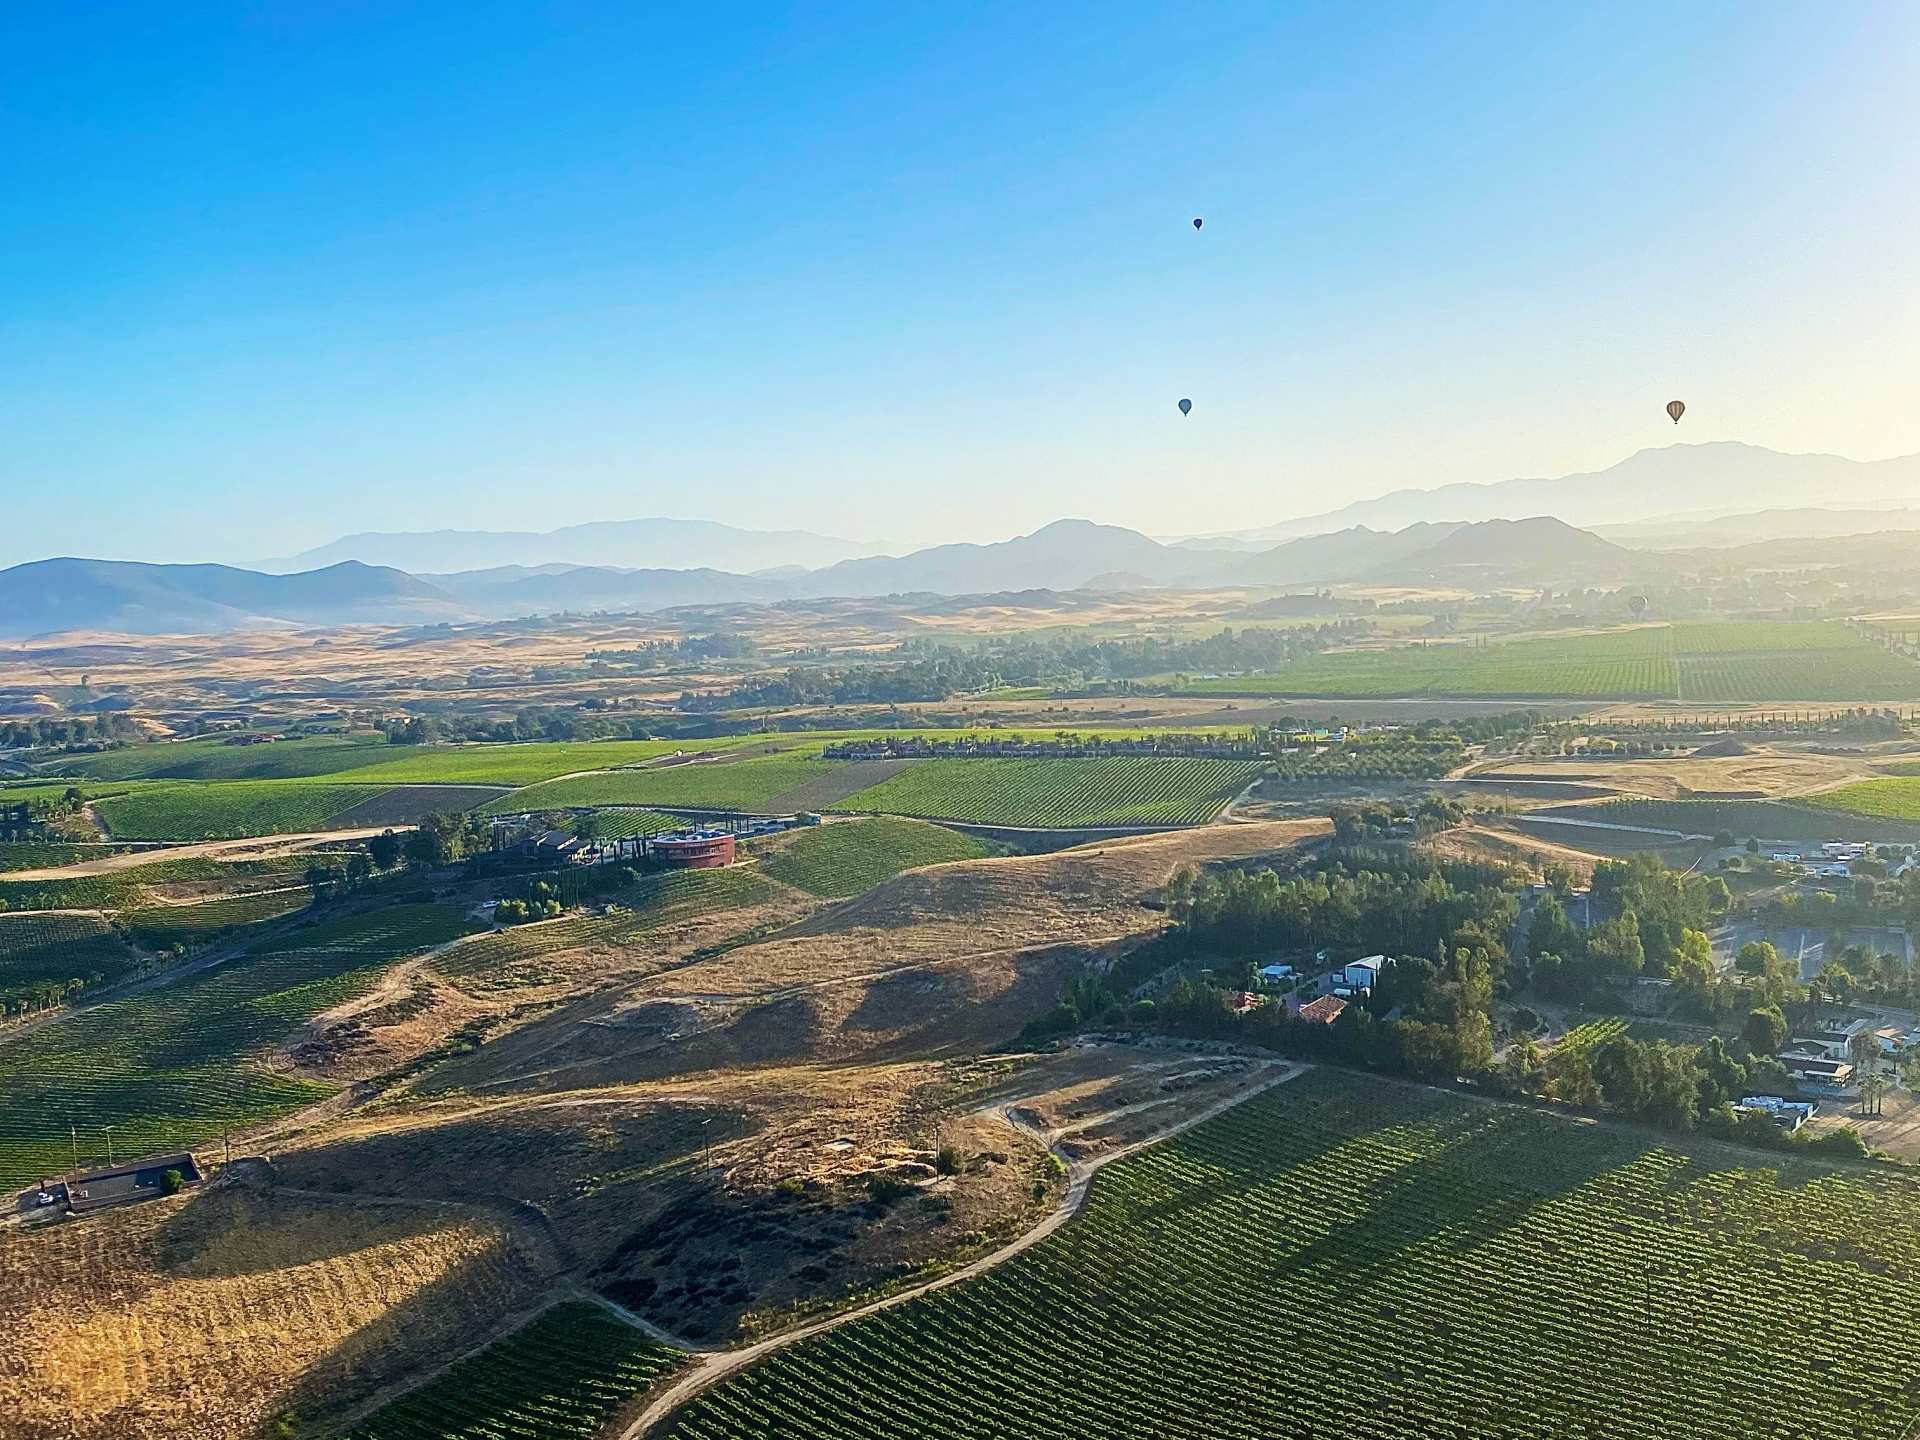 The view from a hot air balloon in Temecula